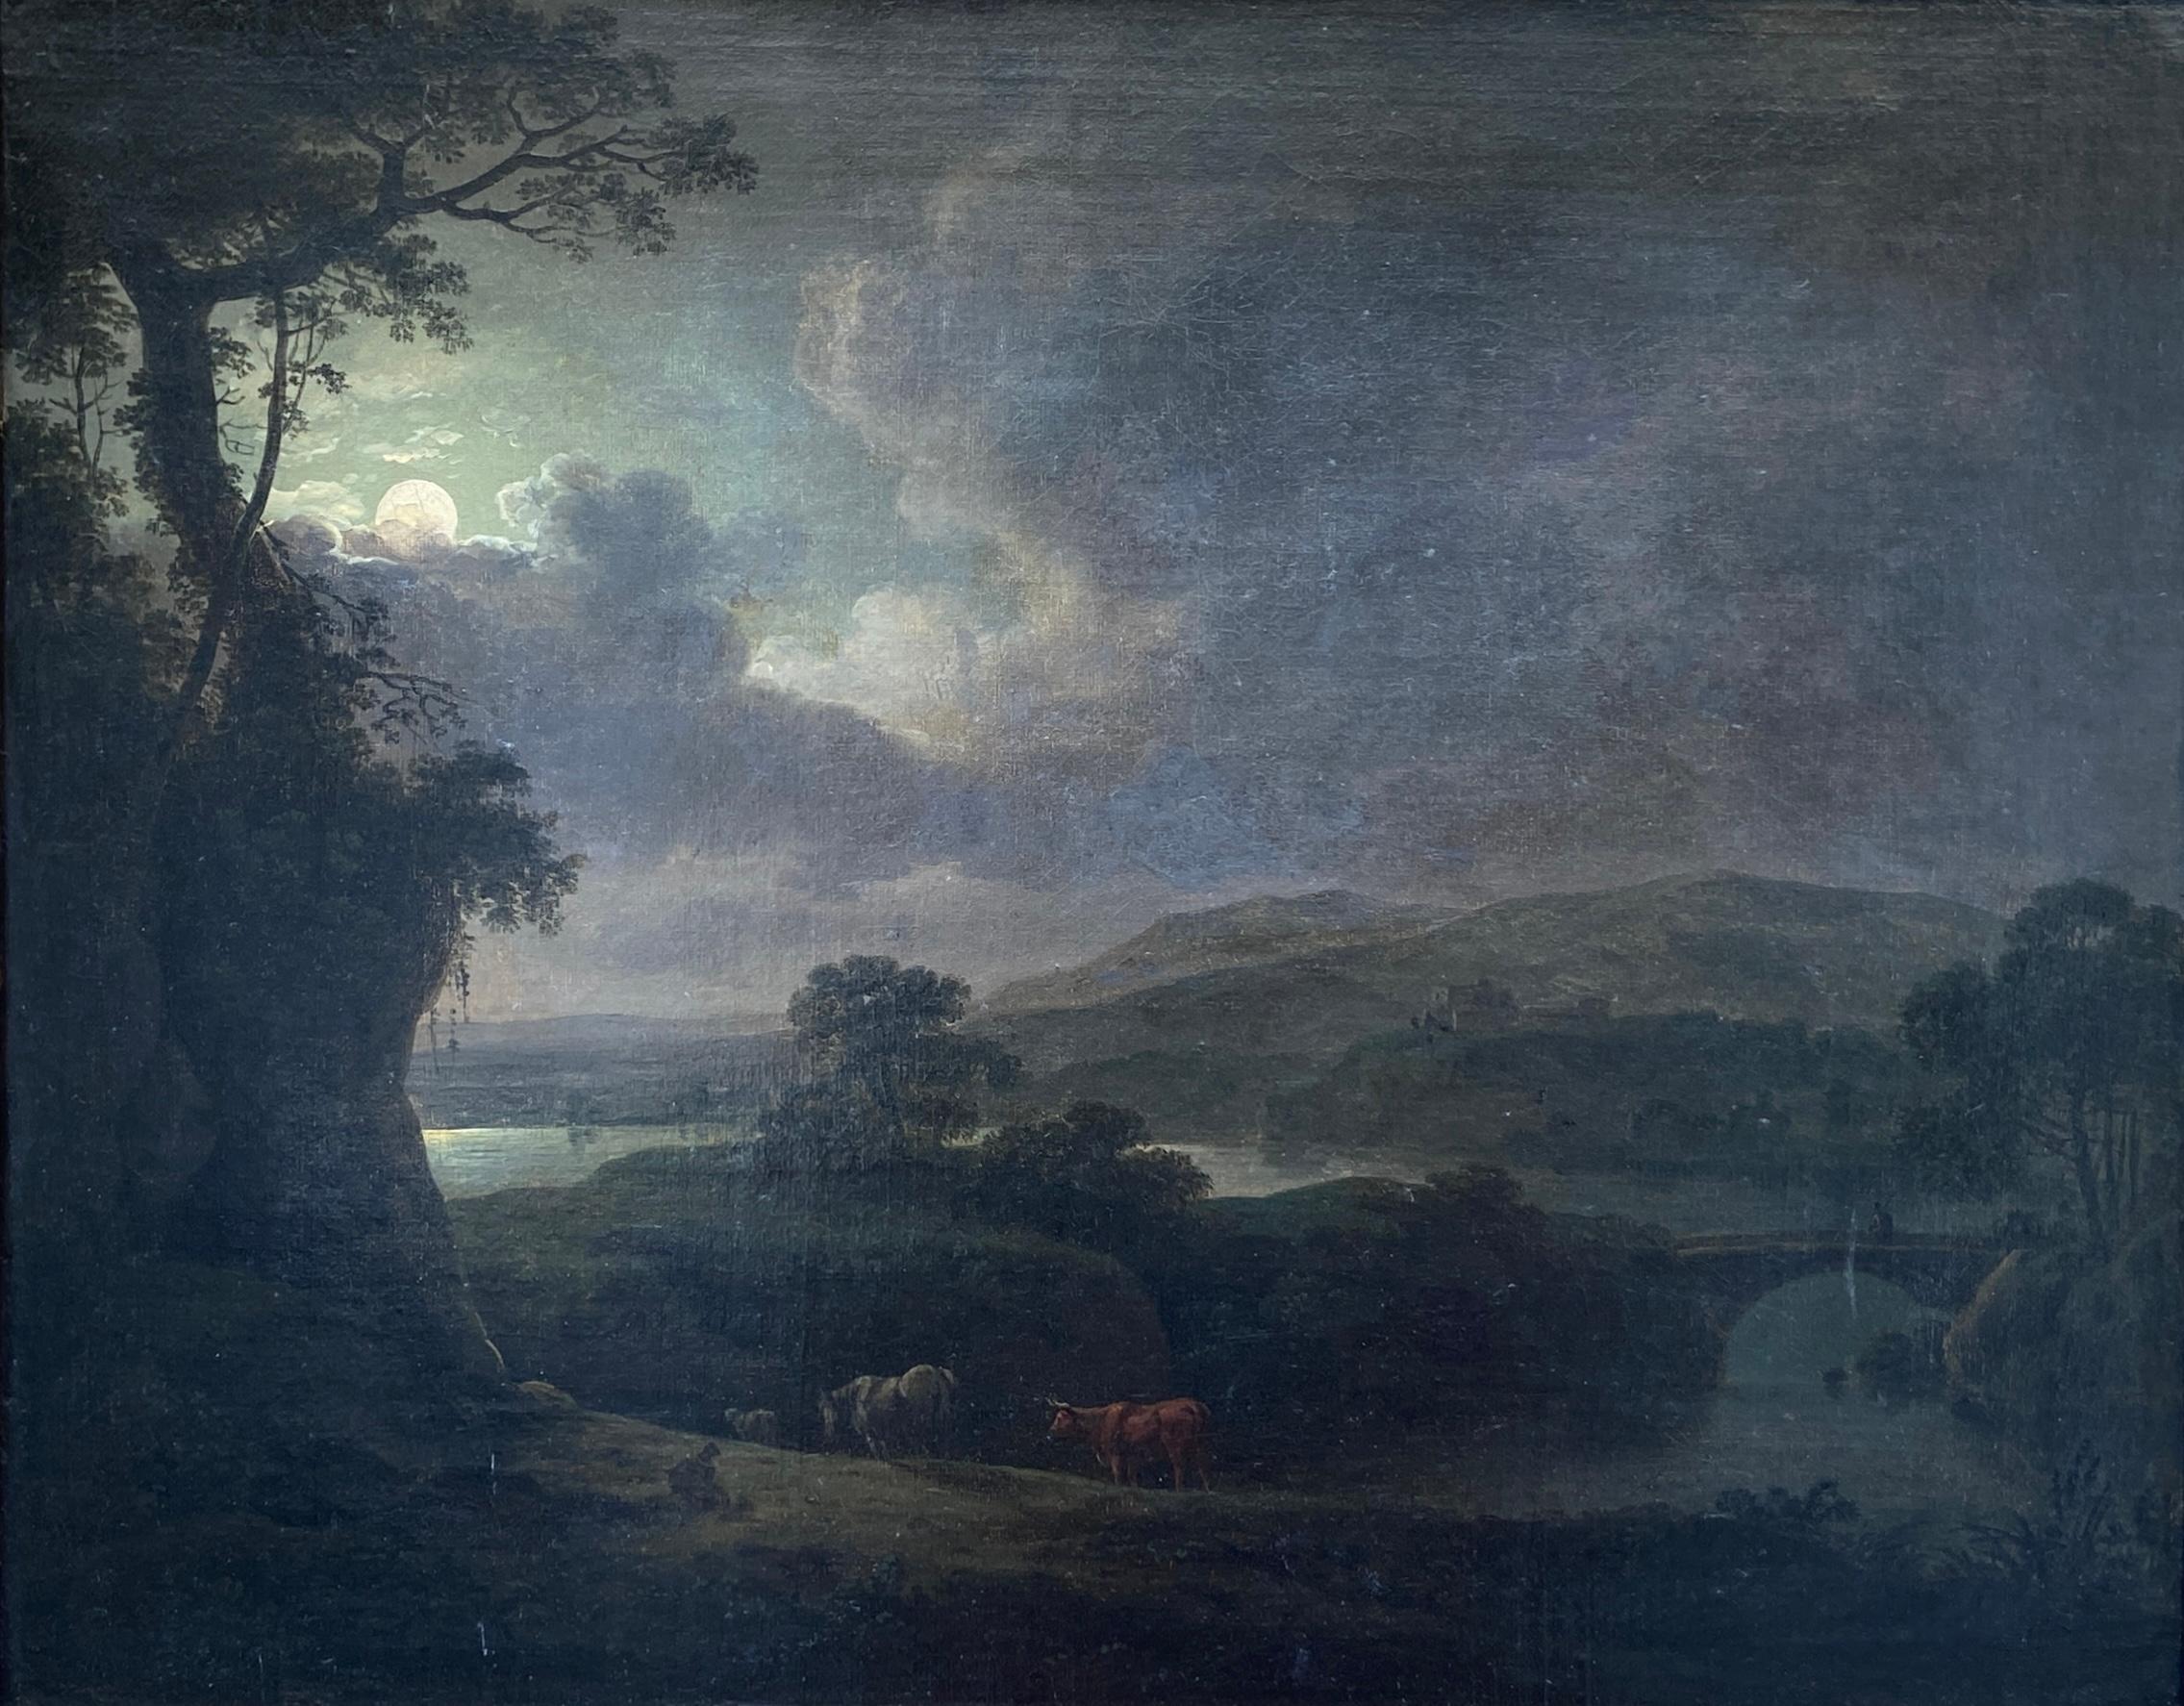 John Rathbone Landscape Painting - View Across the Valley, Late 18th Century English Moonlit Scene